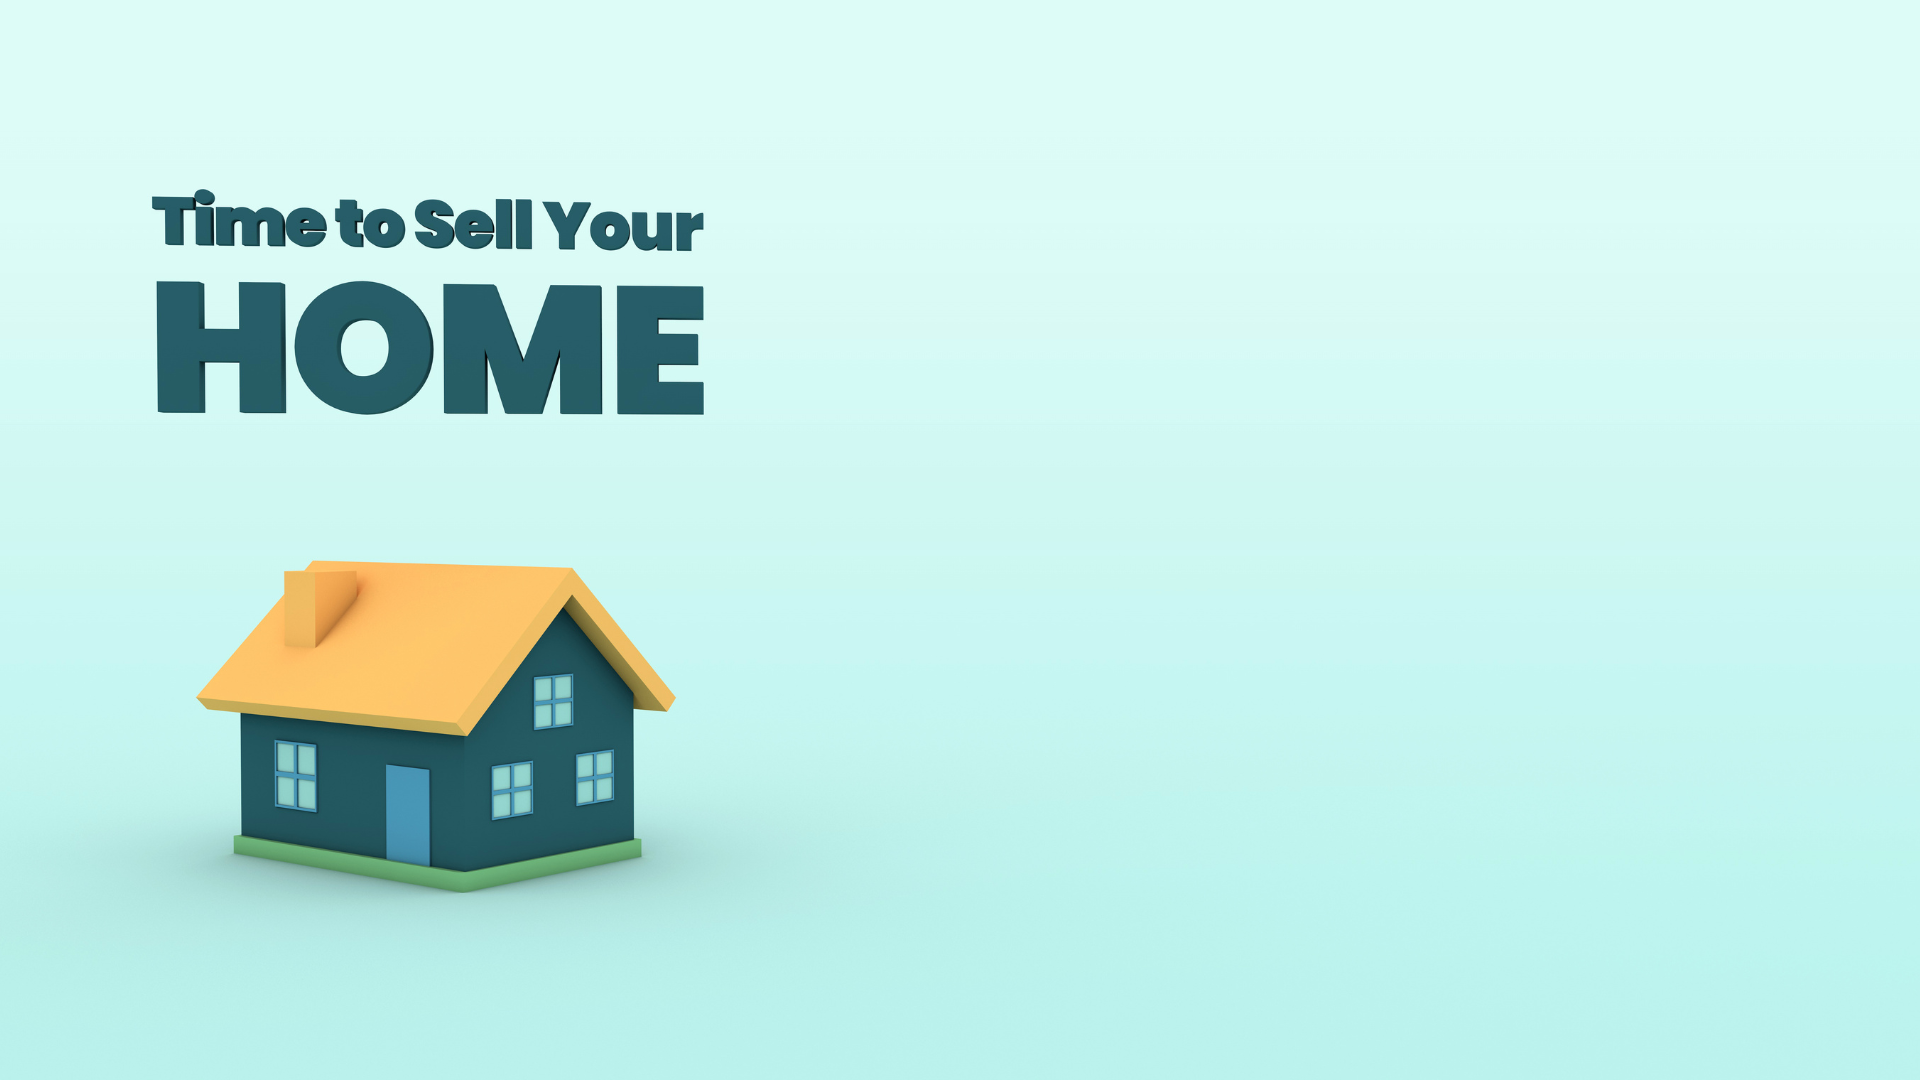 10 Simple Tips to Boost Your Home’s Value and Sell It Faster